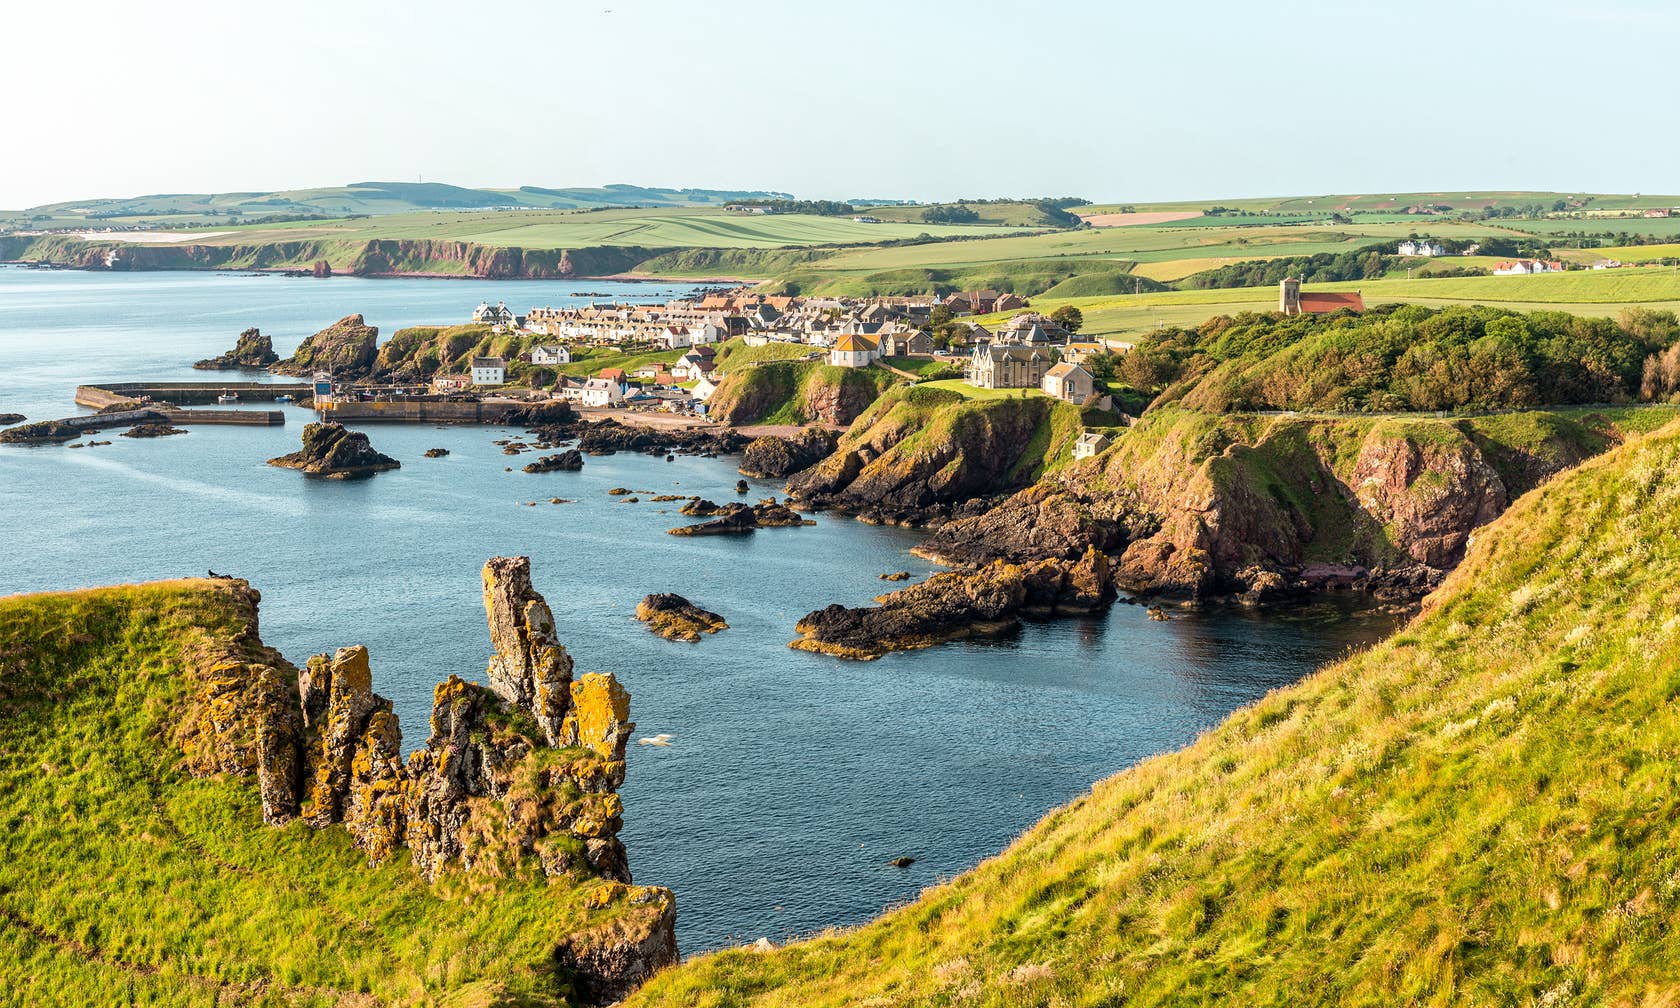 Holiday rentals in Coldingham